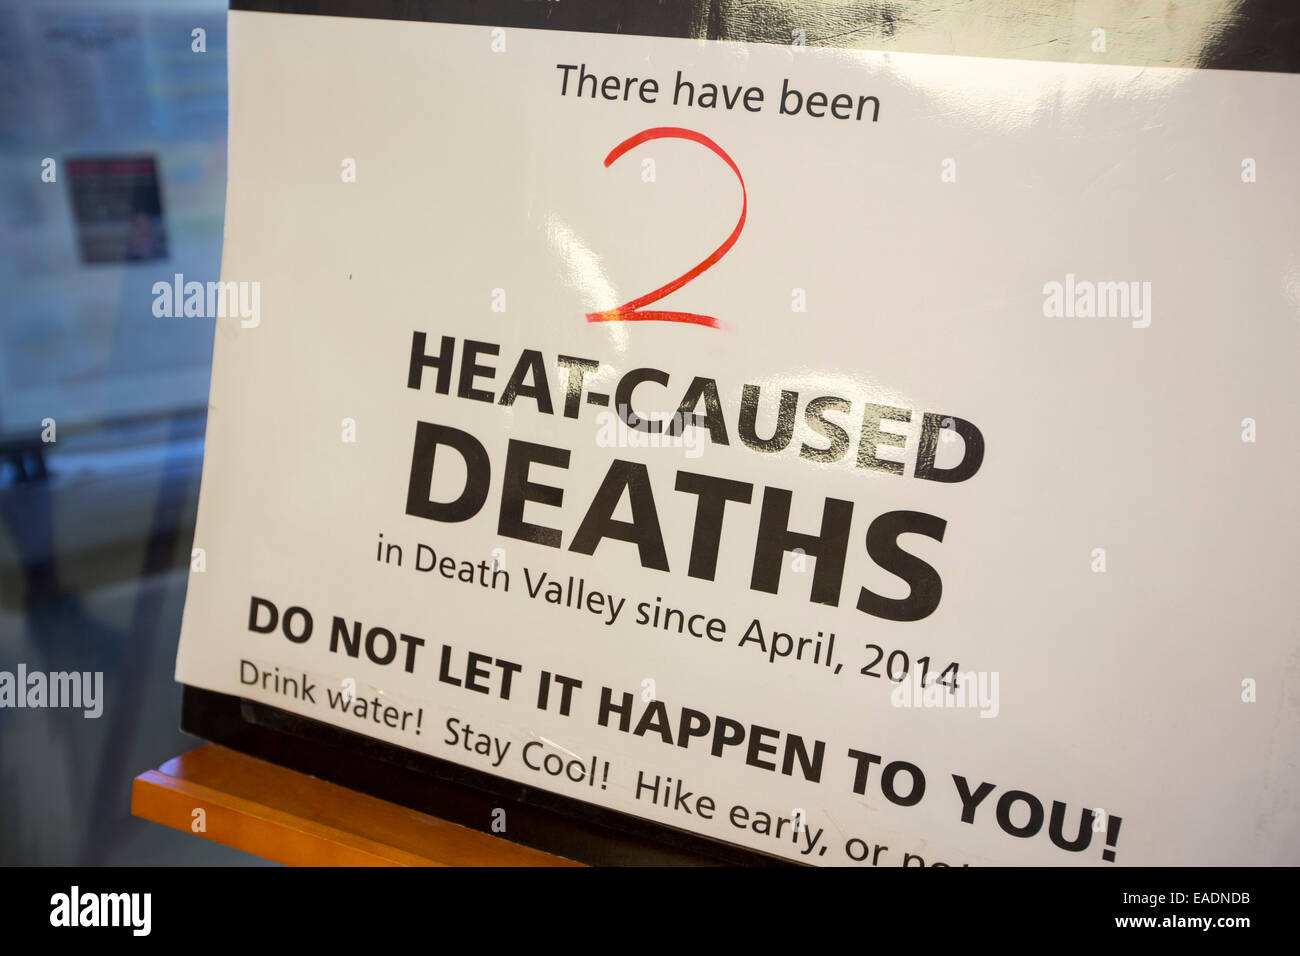 A warning about hear related deaths at the Furnace Creek Visitor Centre in Death Valley. Death Valley is the lowest, hottest, driest place in the USA, with an average annual rainfall of around 2 inches, some years it does not receive any rain at all. Stock Photo